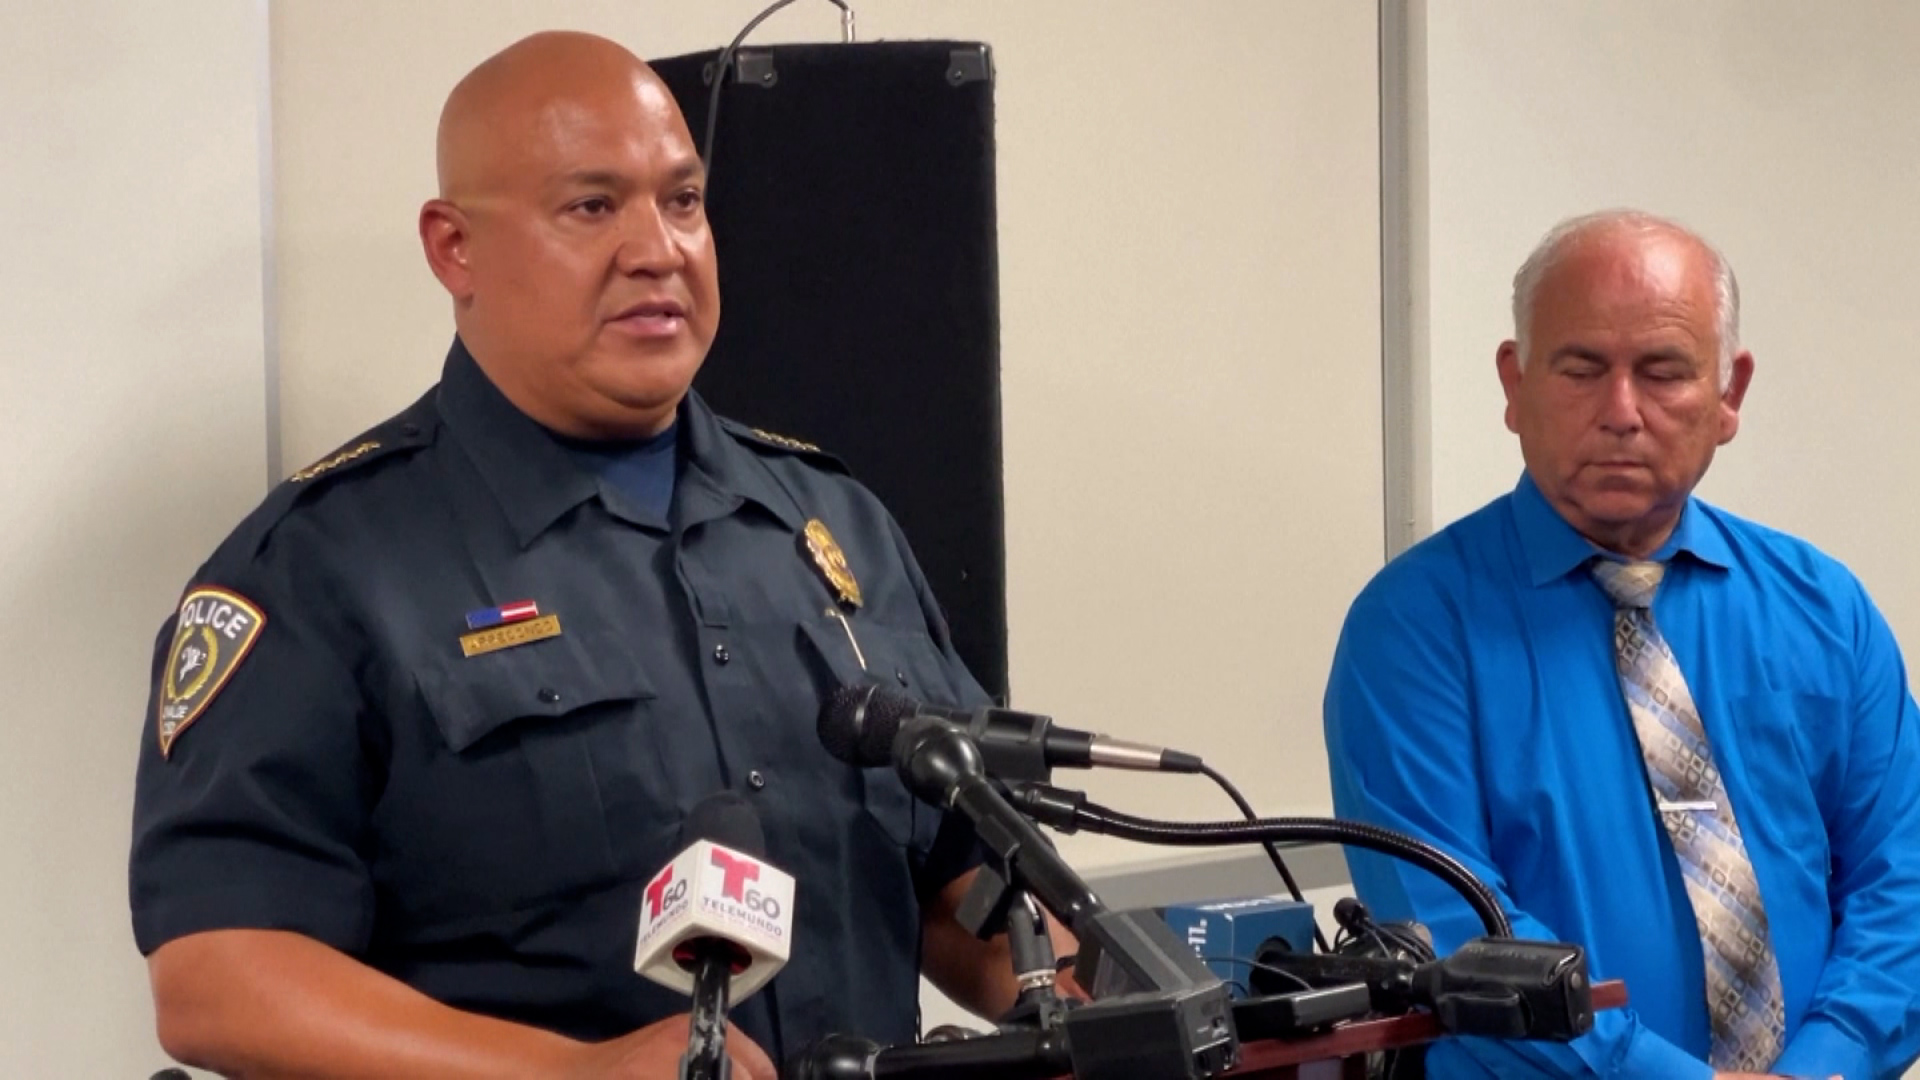 Uvalde School District police chief Pedro "Pete" Arredondo speaks during a news conference on Tuesday, May 24.